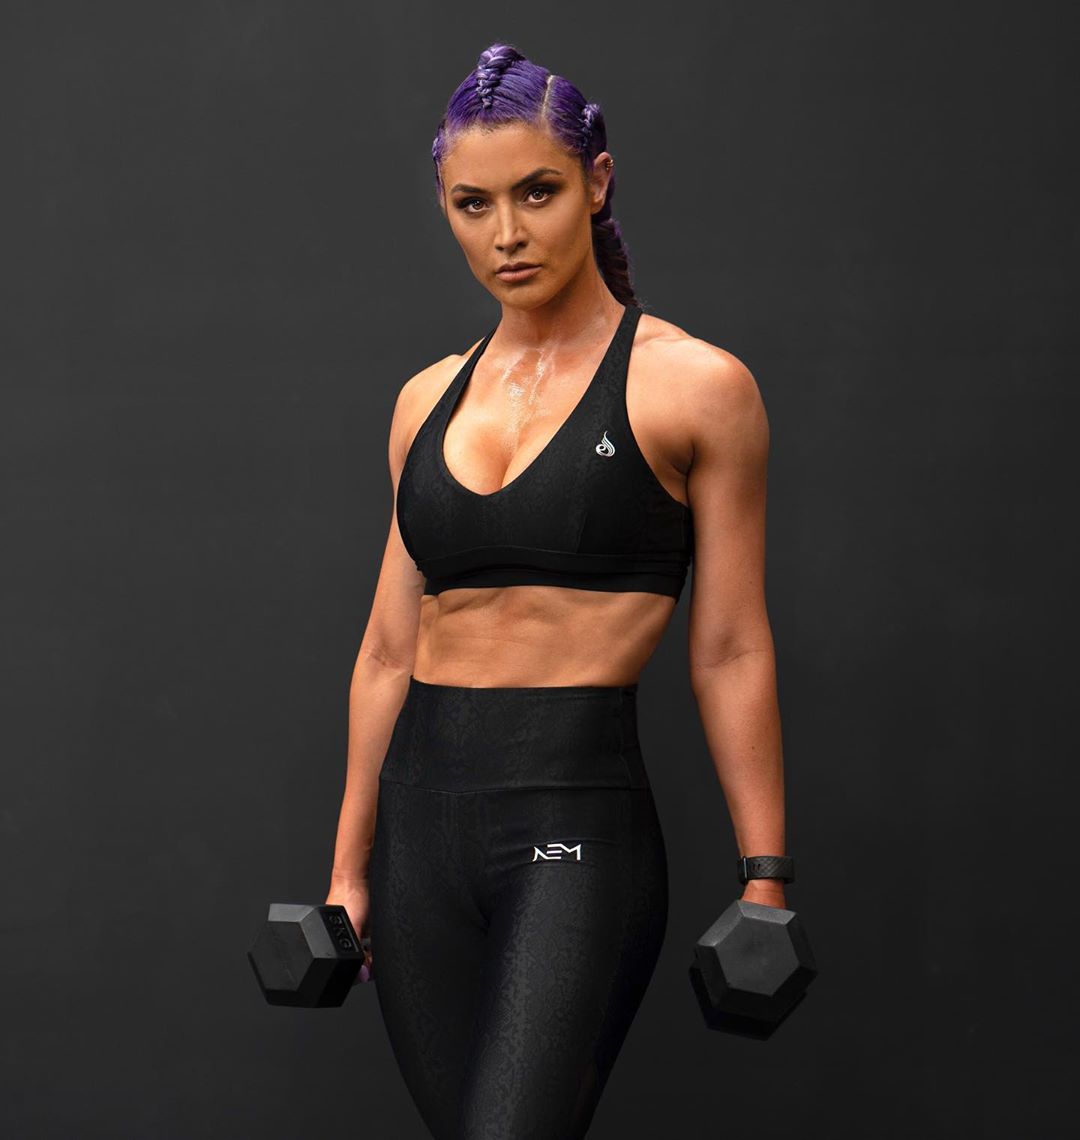 Top 10 Popular Instagram Fitness Models And Influencers 2022